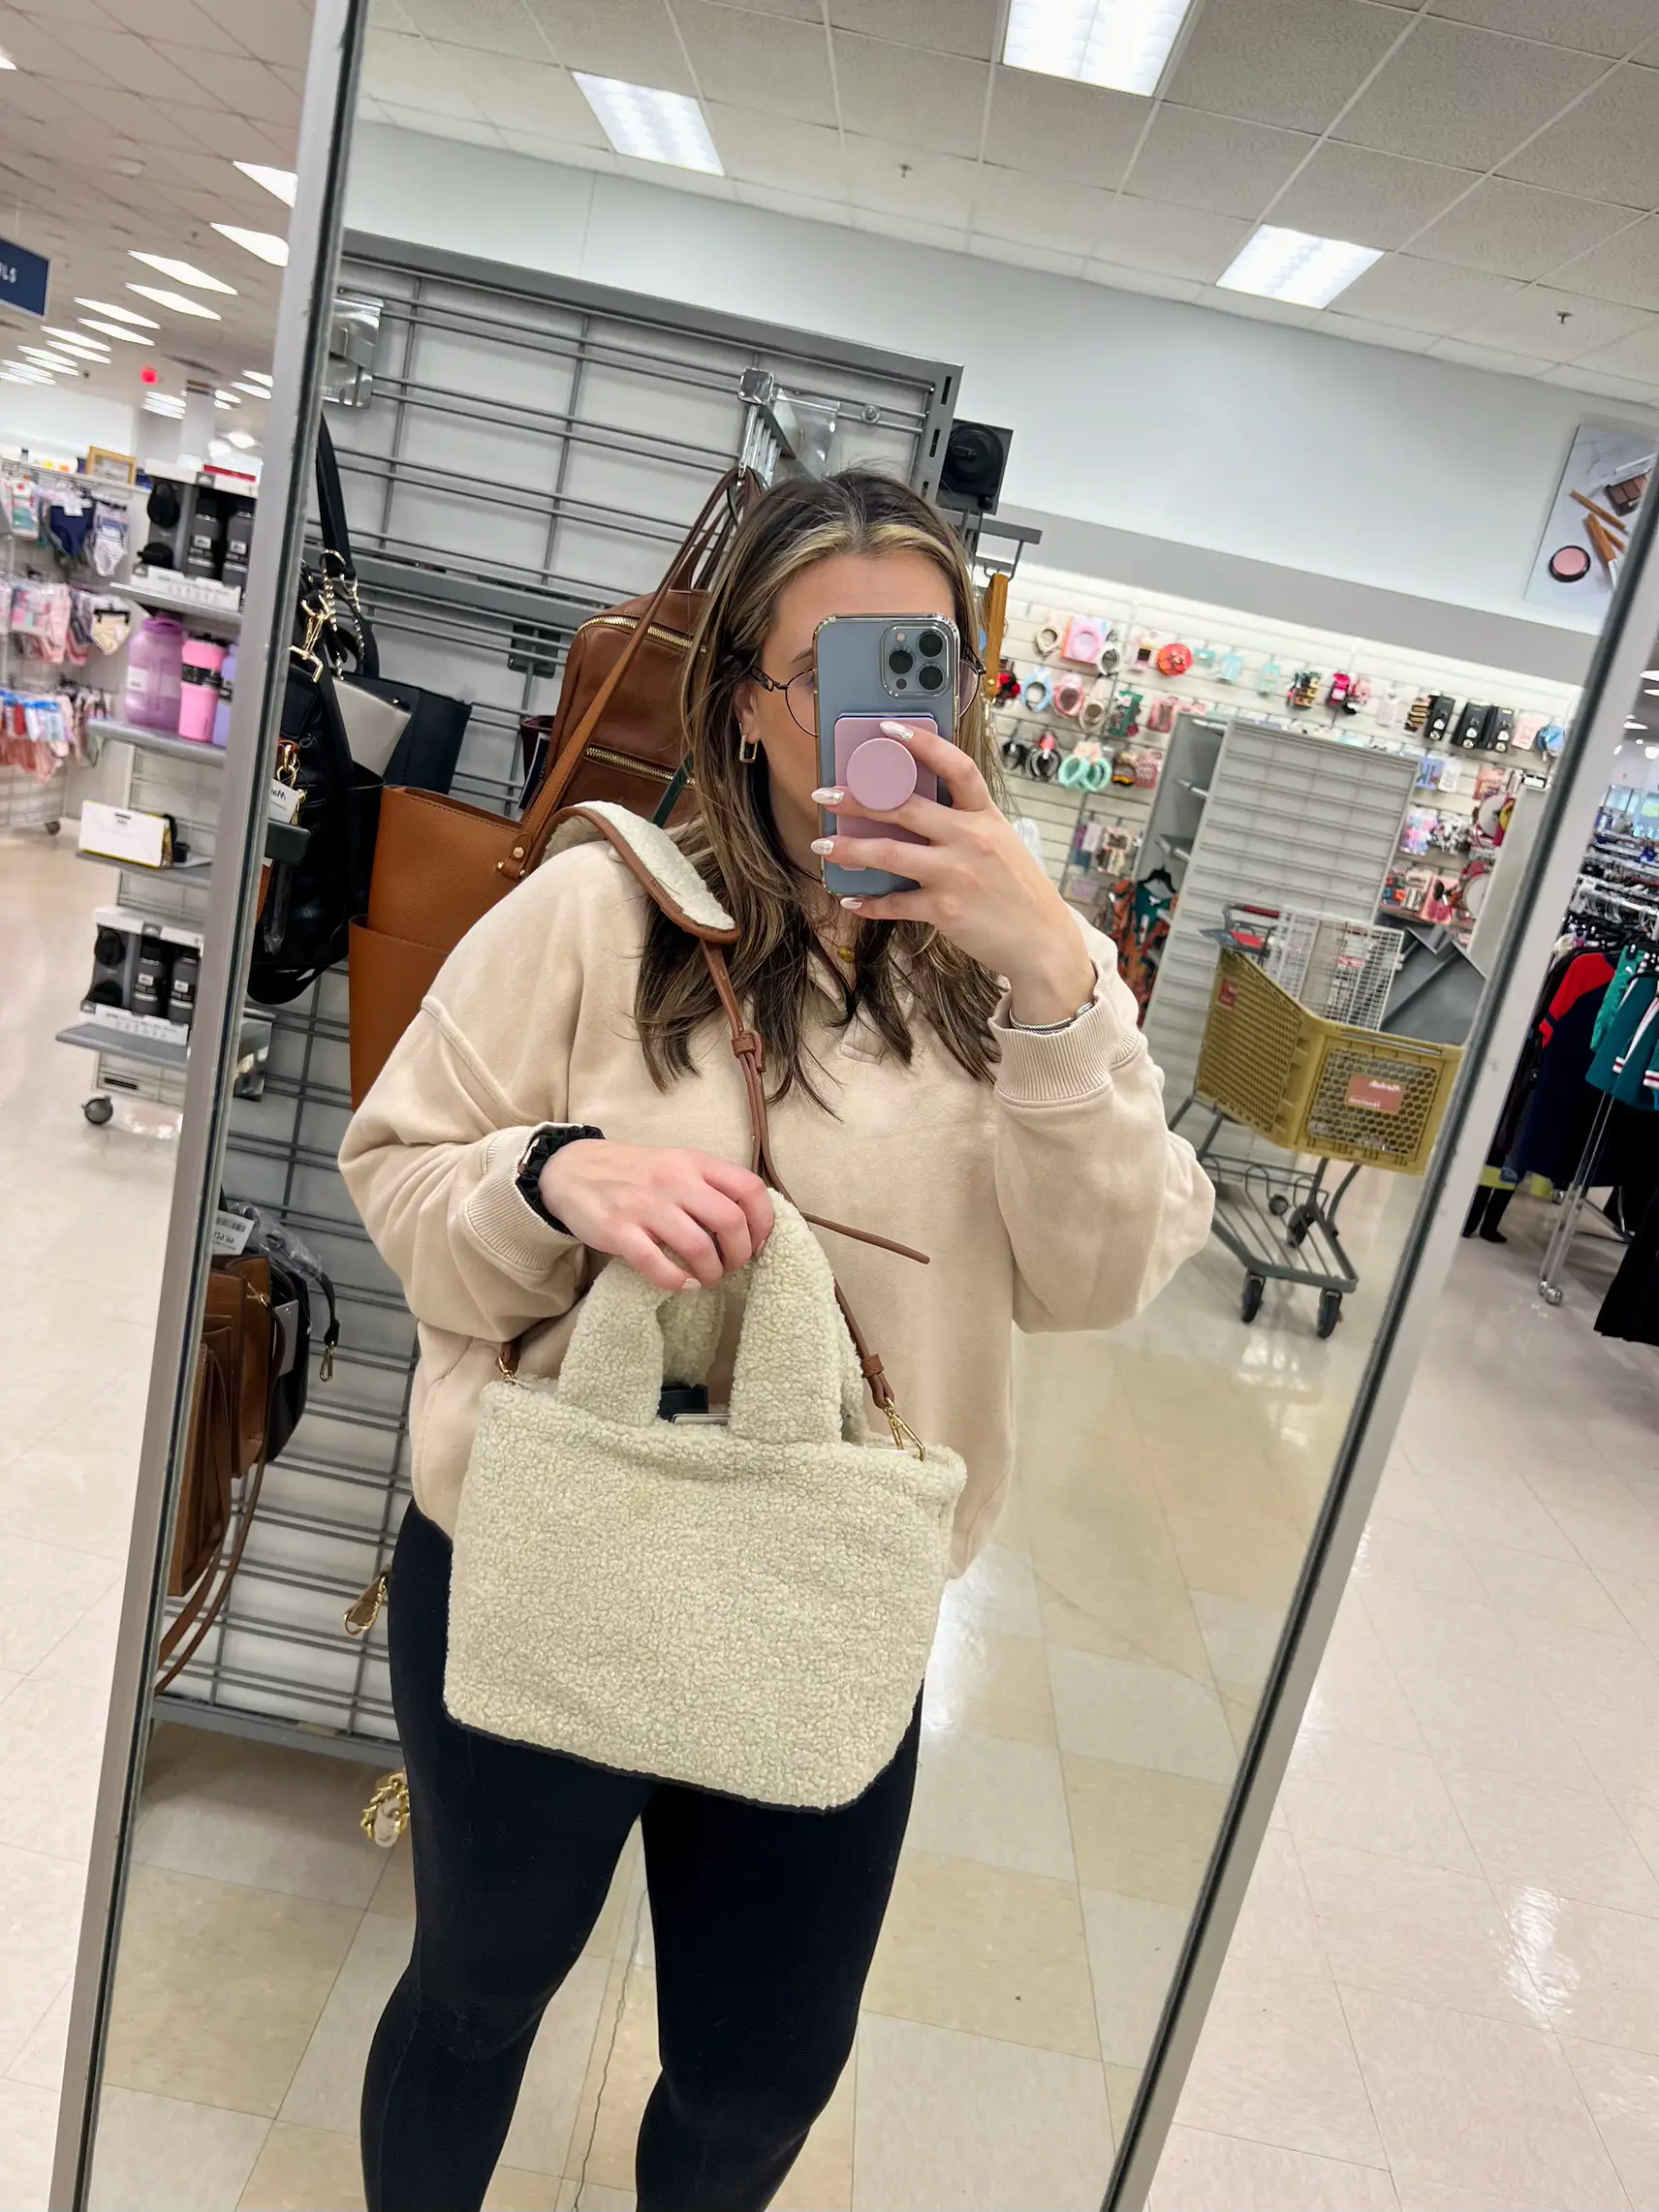 F&W STYLE  LEATHER HANDBAGS on Instagram: How fabulous is this look by  @titispassion rocking her leopard Roxy bag from our @tjmaxx @marshalls  collection! 🧡✨ [SWIPE] to see her @marshalls shopping diary! …………..